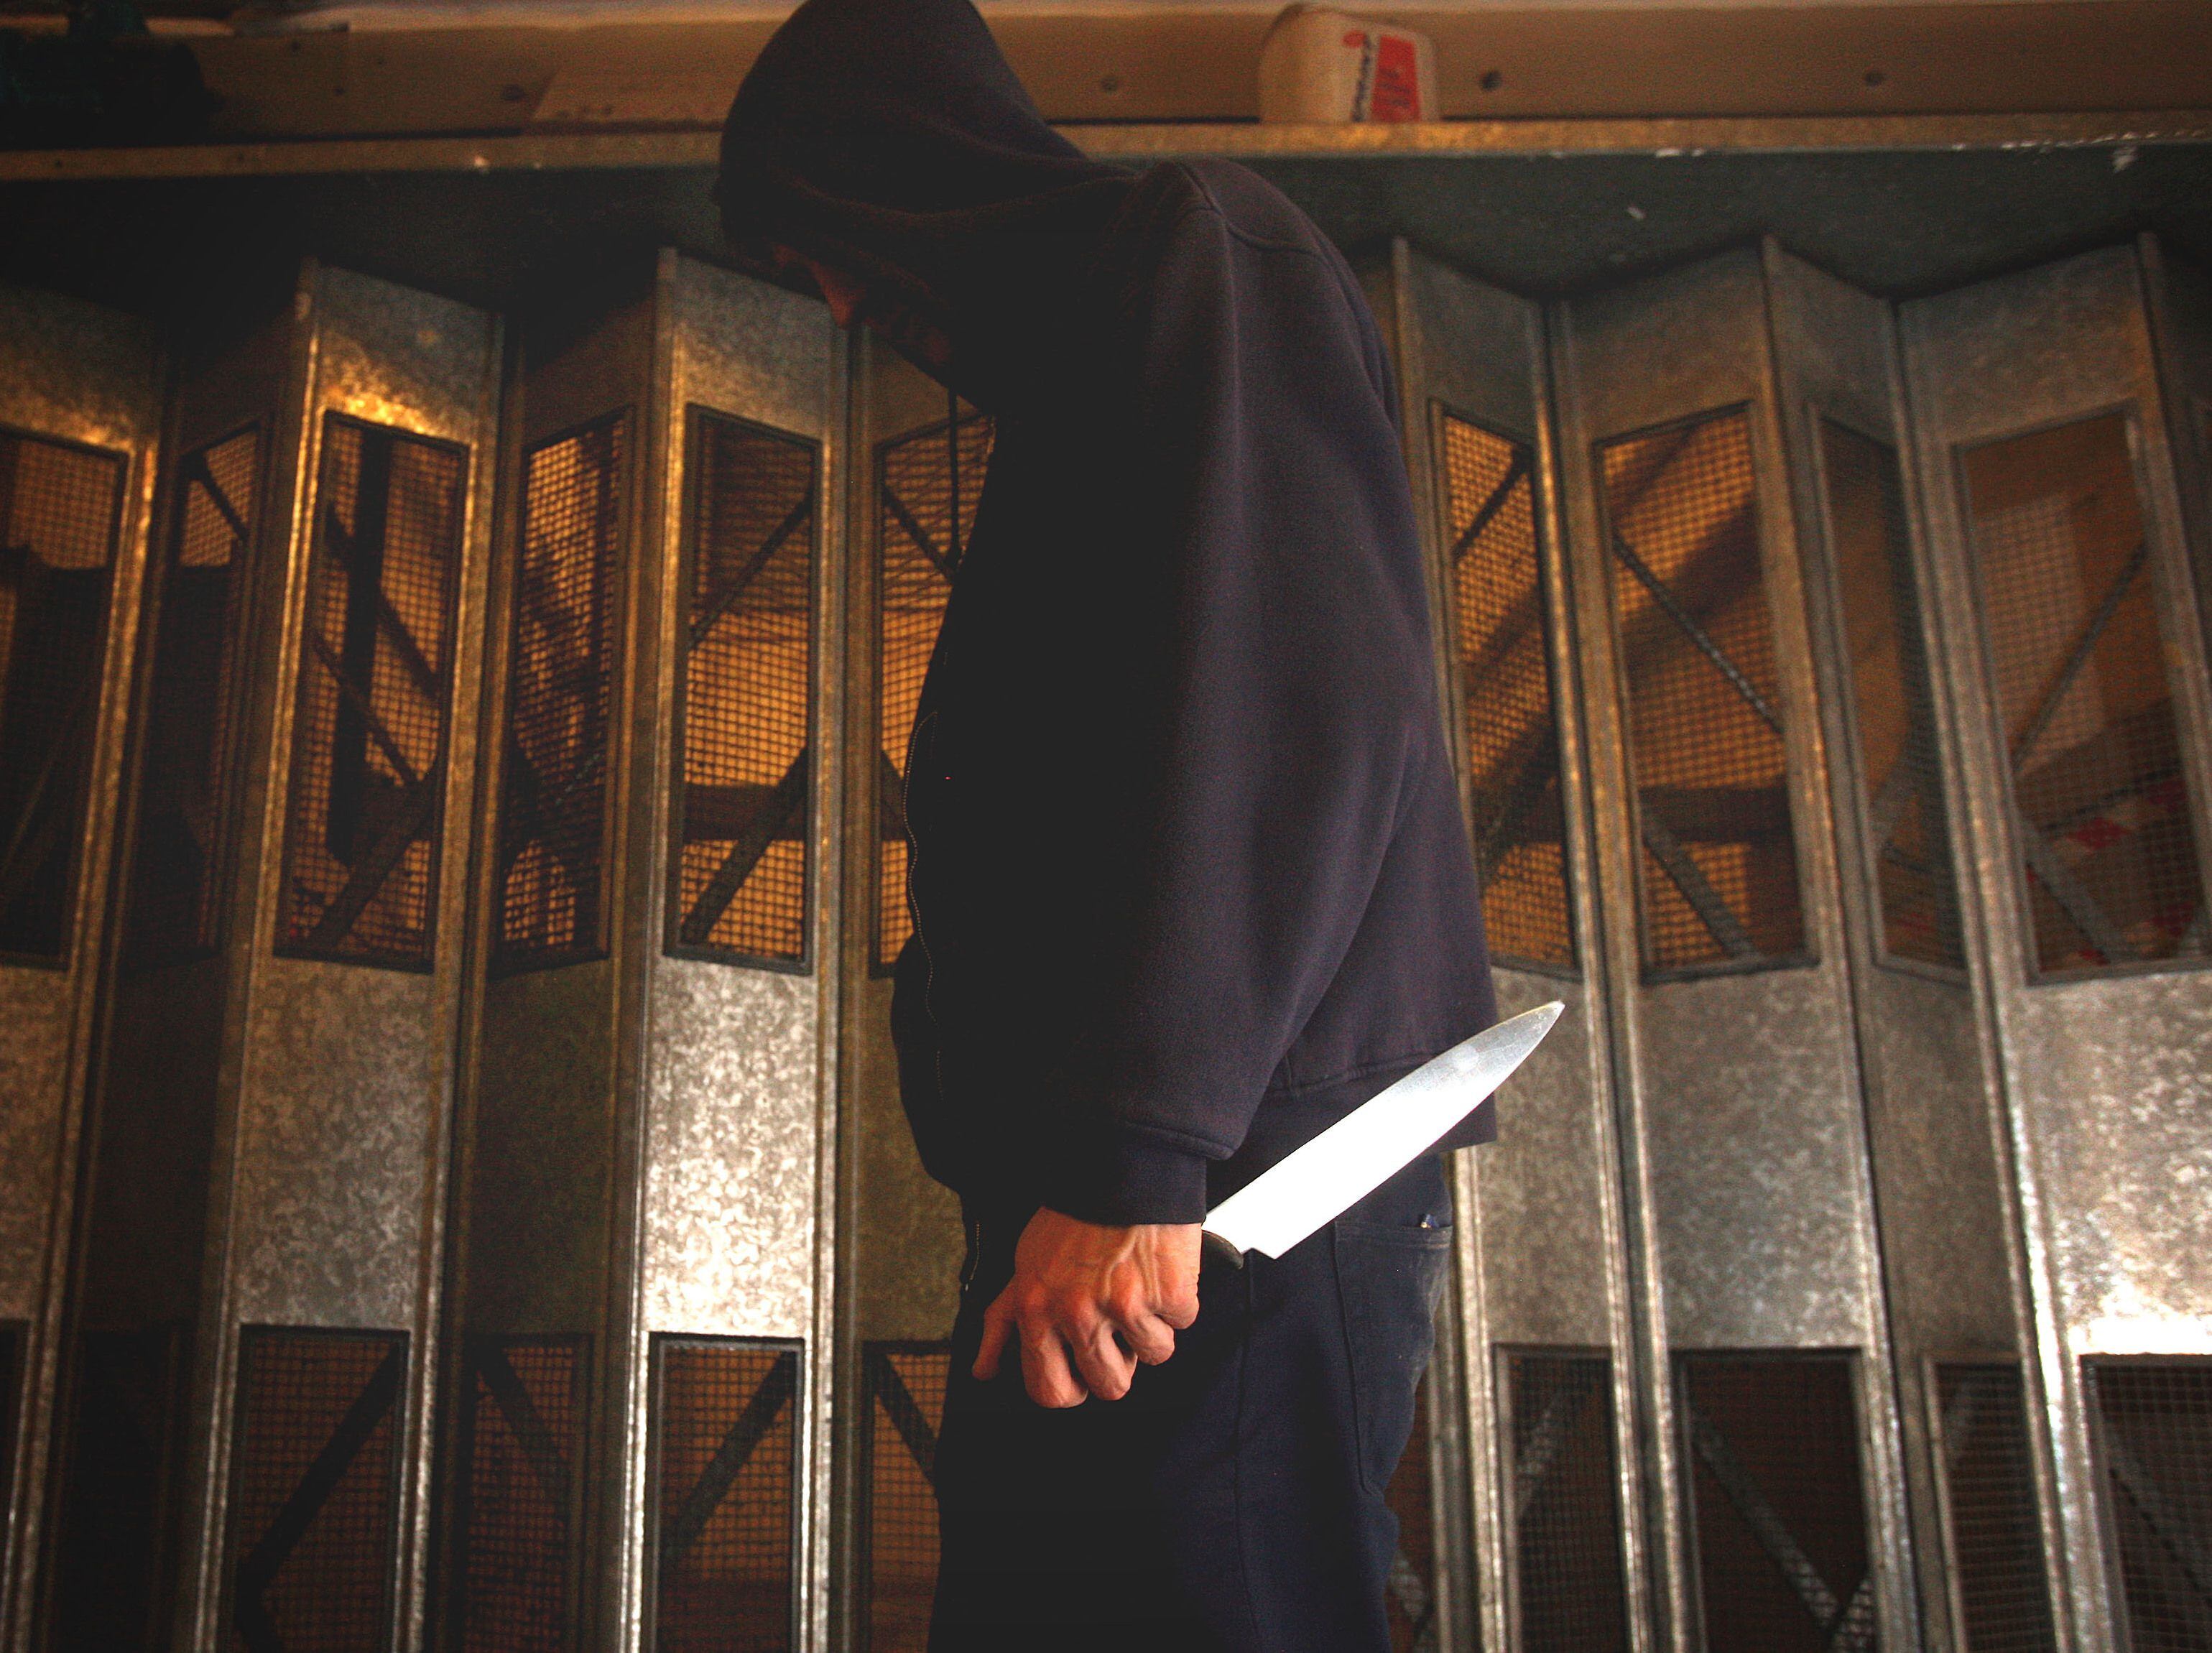 Two-thirds of knife crime convictions in the West Midlands are for first-time offenders